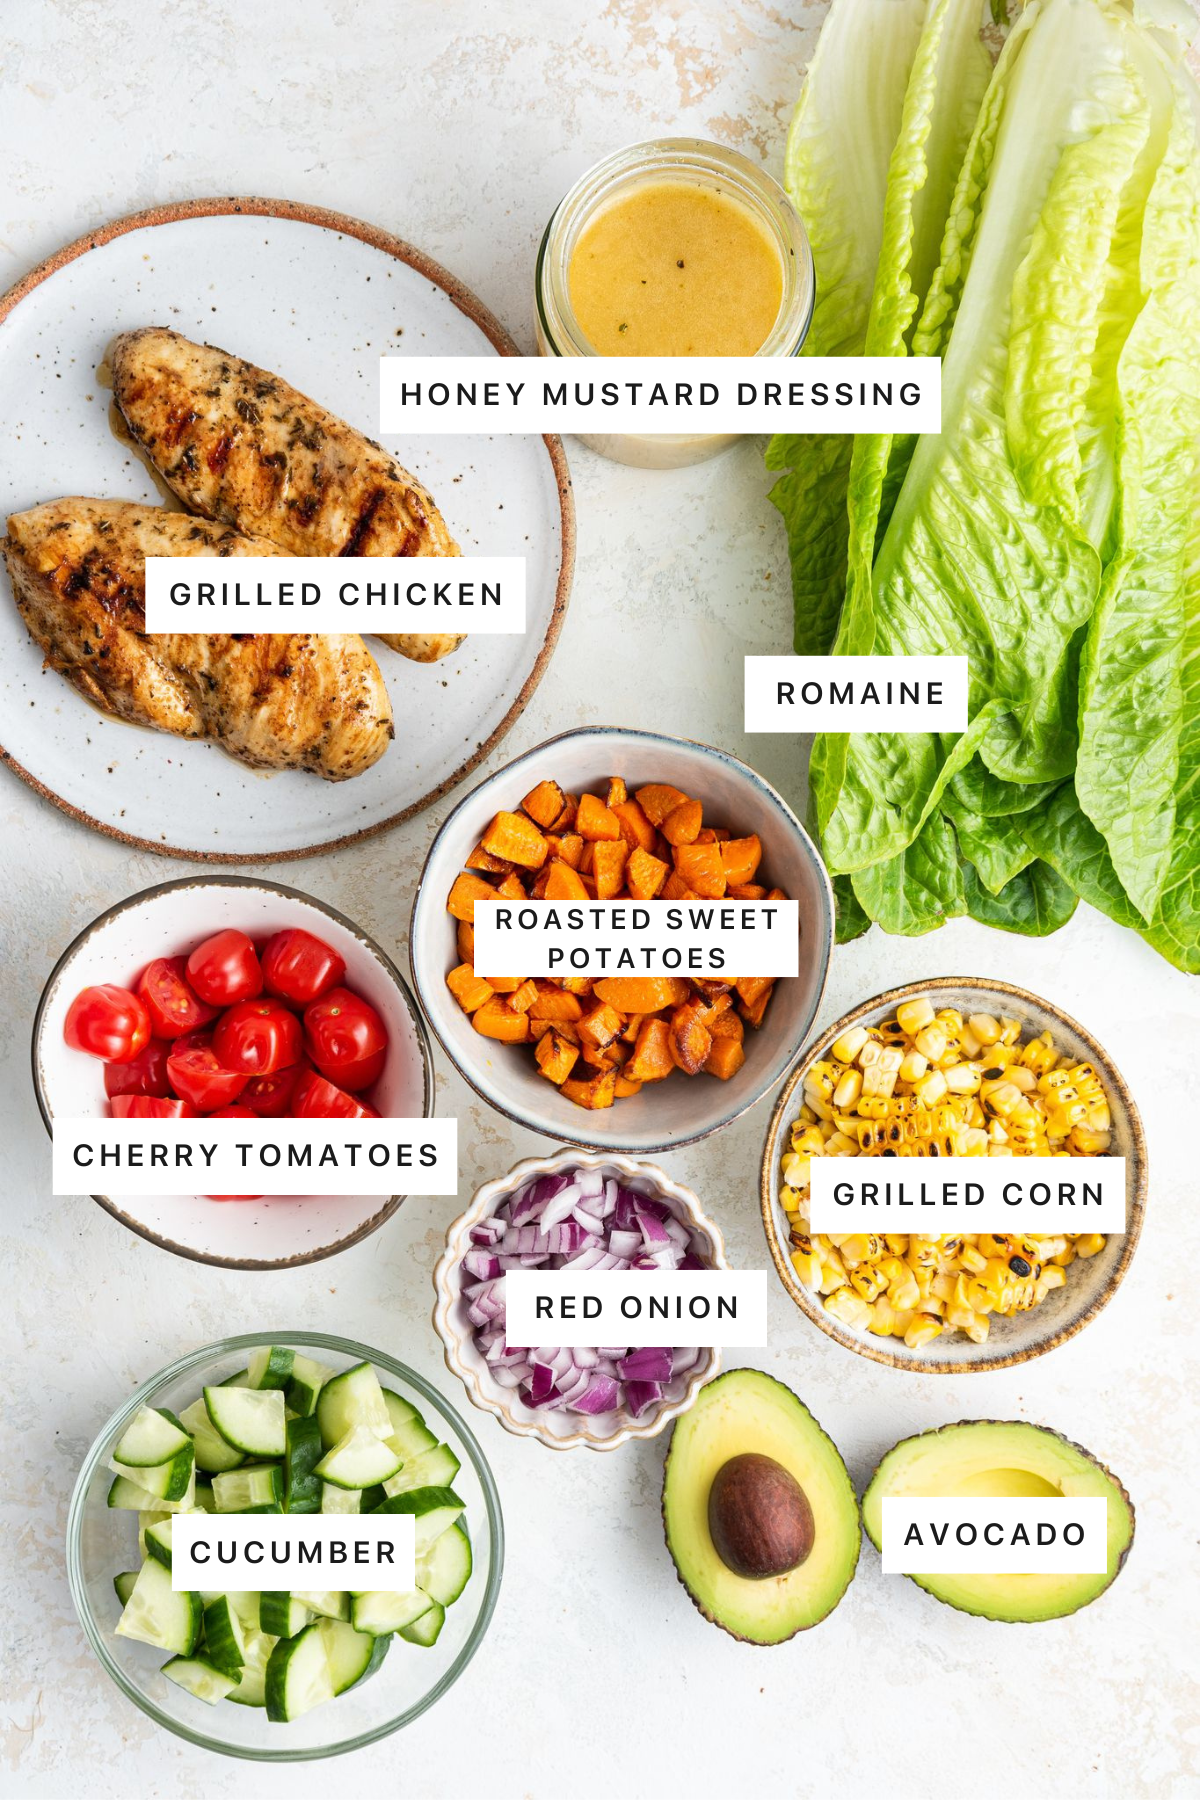 Ingredients measured out to make a Grilled Chicken Salad: grilled chicken, honey mustard dressing, romaine, roasted sweet potatoes, cherry tomatoes, grilled corn, red onion, cucumber and avocado.